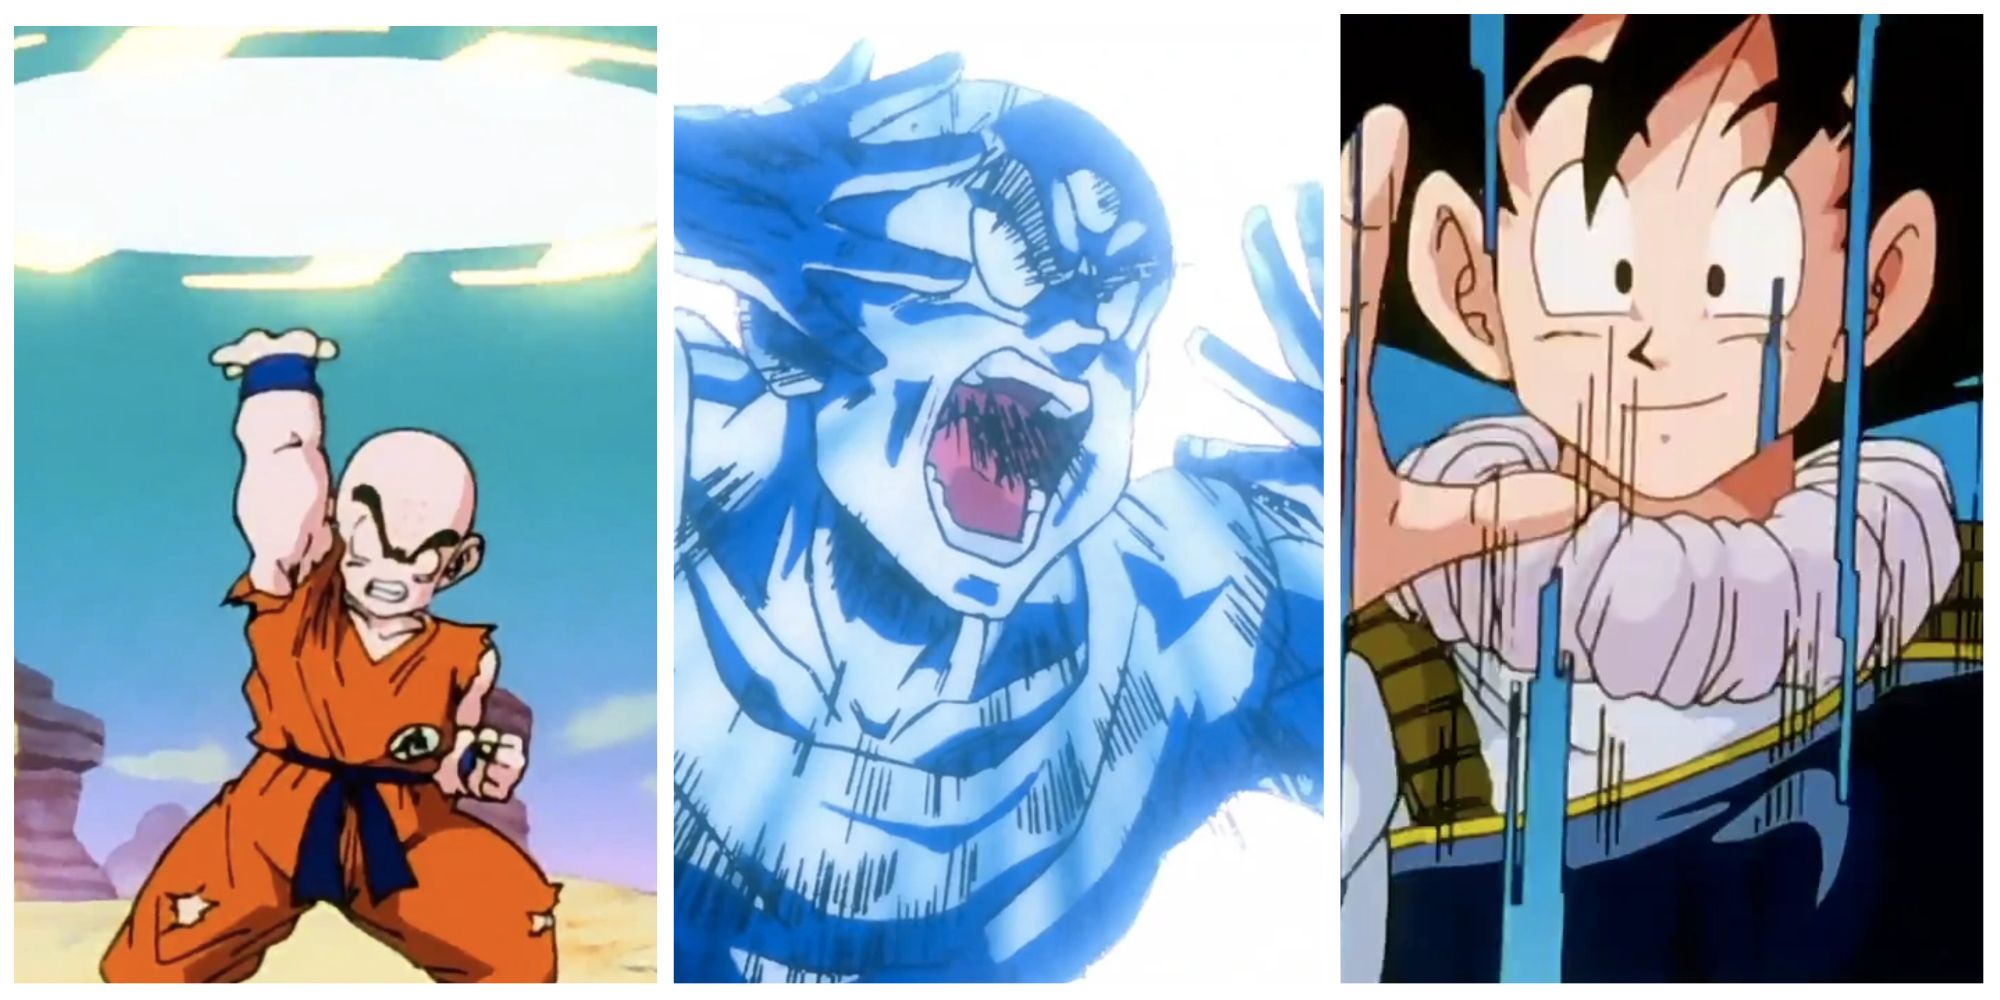 krillin, goku, and tien using different moves